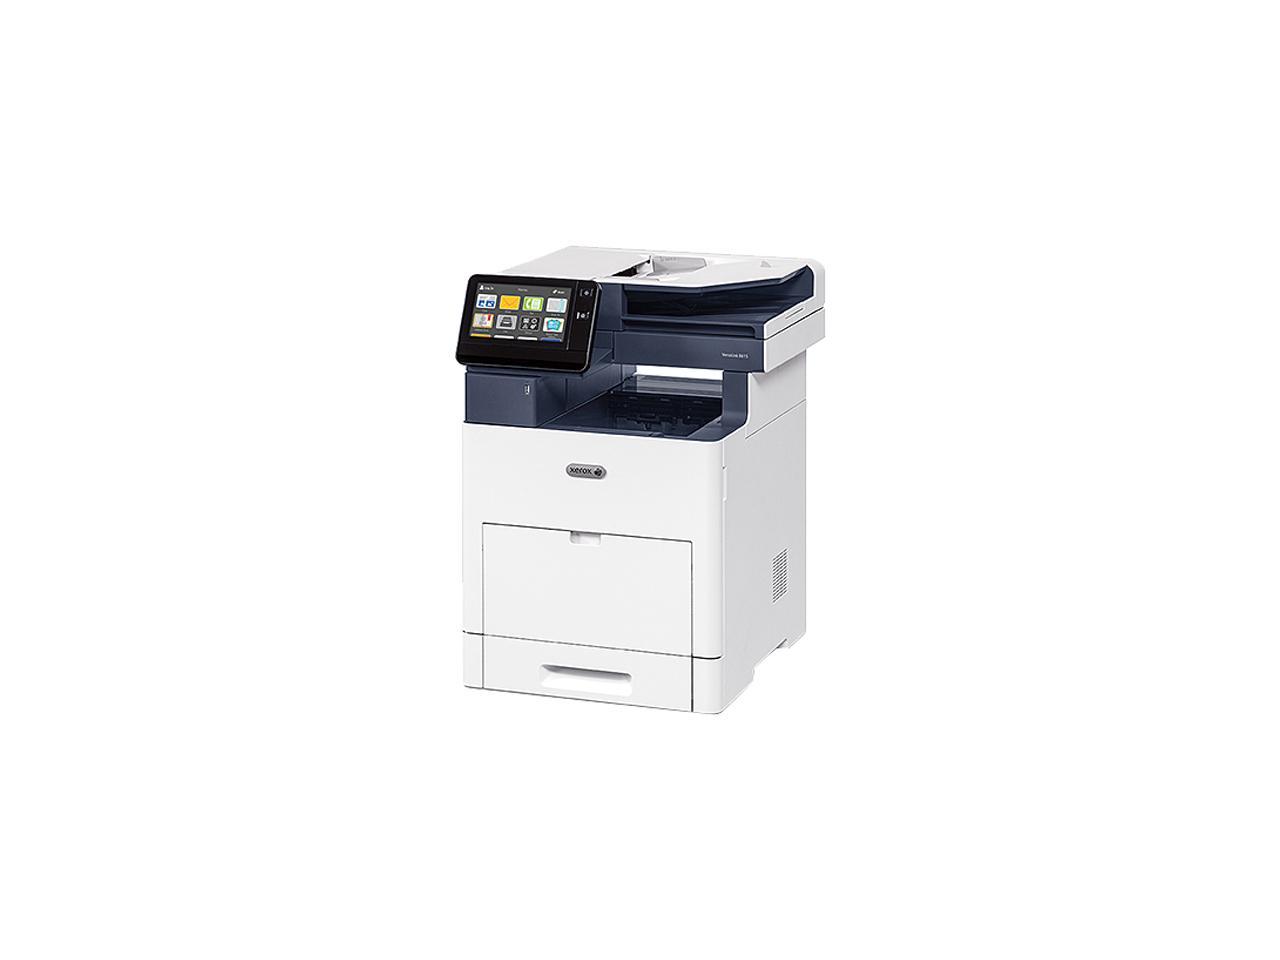 Xerox VersaLink B605/S B/W Multifunction Printer, Print/Copy/Scan Letter/Legal, Up To 58ppm, 2-Sided Print, USB/Ethernet, 550-Sheet Tray, 150 Bypass Tray, 100-Sheet DADF, 320 GB Hard Disk Drive, 110V, EIP